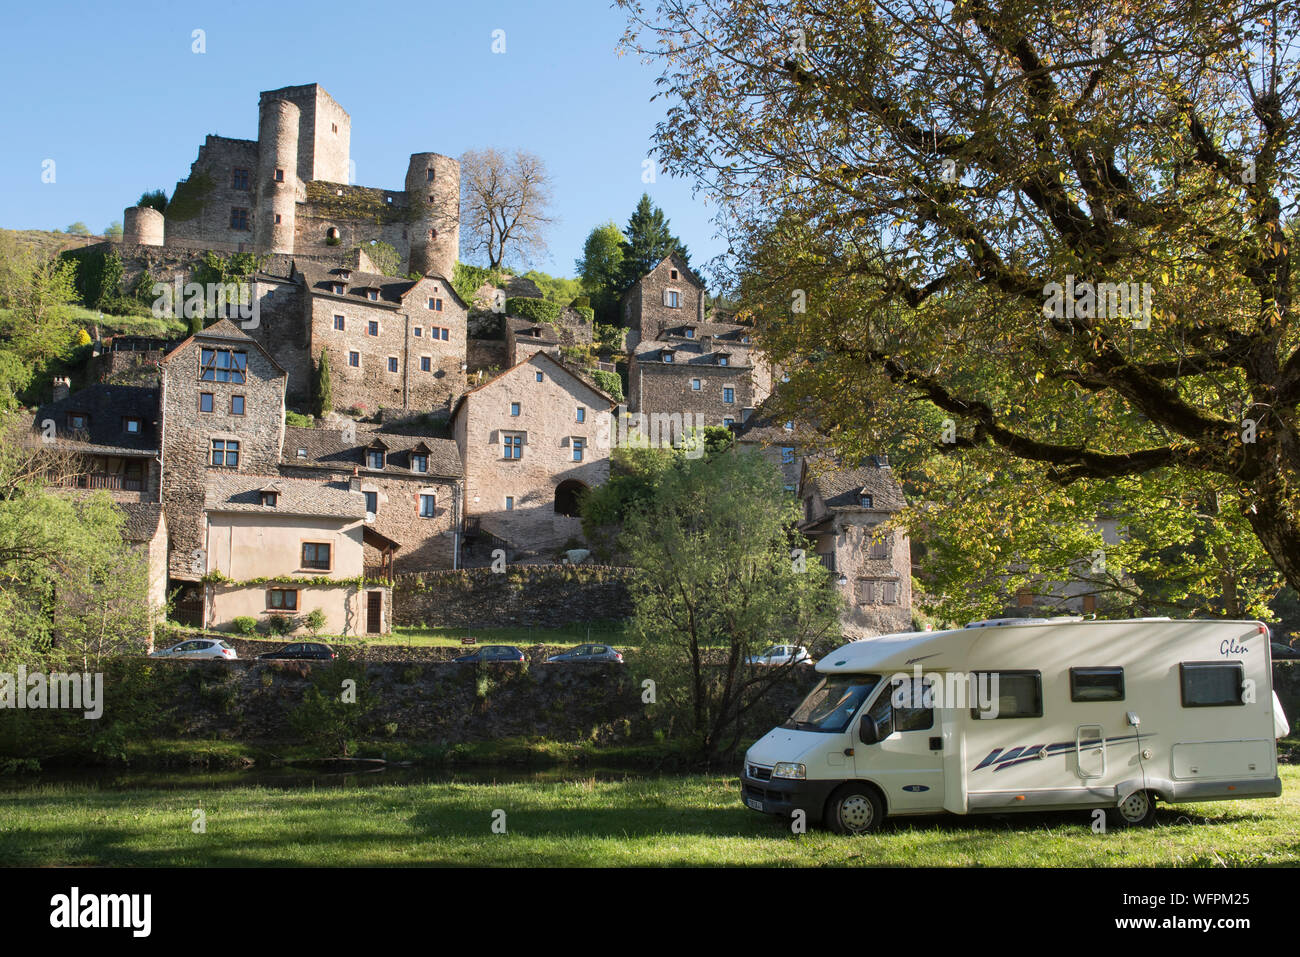 France, Aveyron, Belcastel, labeled the Most Beautiful Villages of France, River Aveyron, houses overlooking the valley, Chateau de Belcastel, from 10th to 15th Century, a historic monument, Le Bourg Camping Site on the banks of the River Aveyron Stock Photo